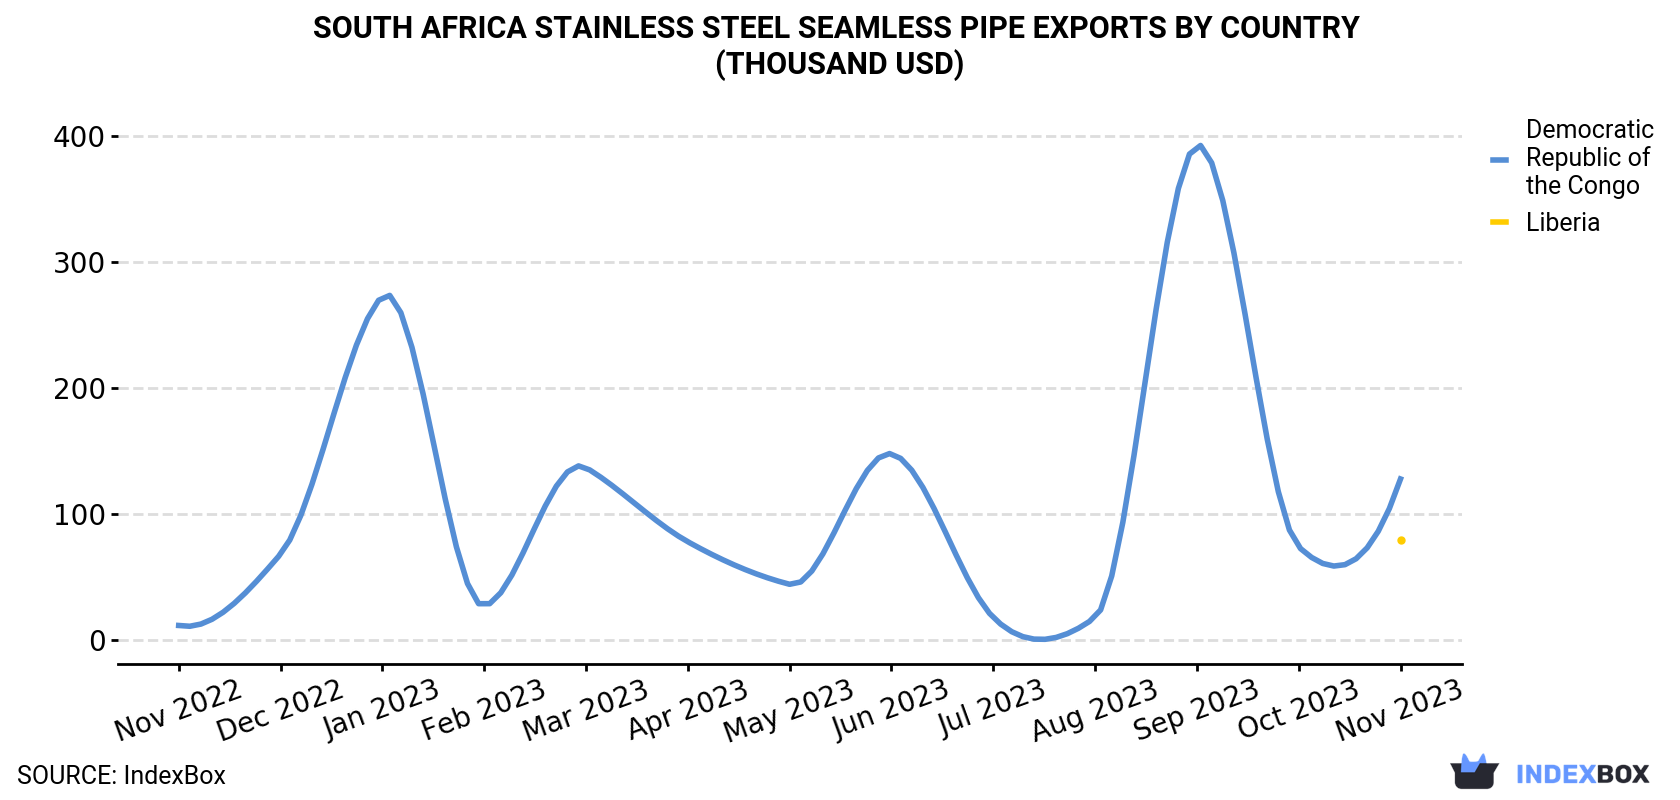 South Africa Stainless Steel Seamless Pipe Exports By Country (Thousand USD)